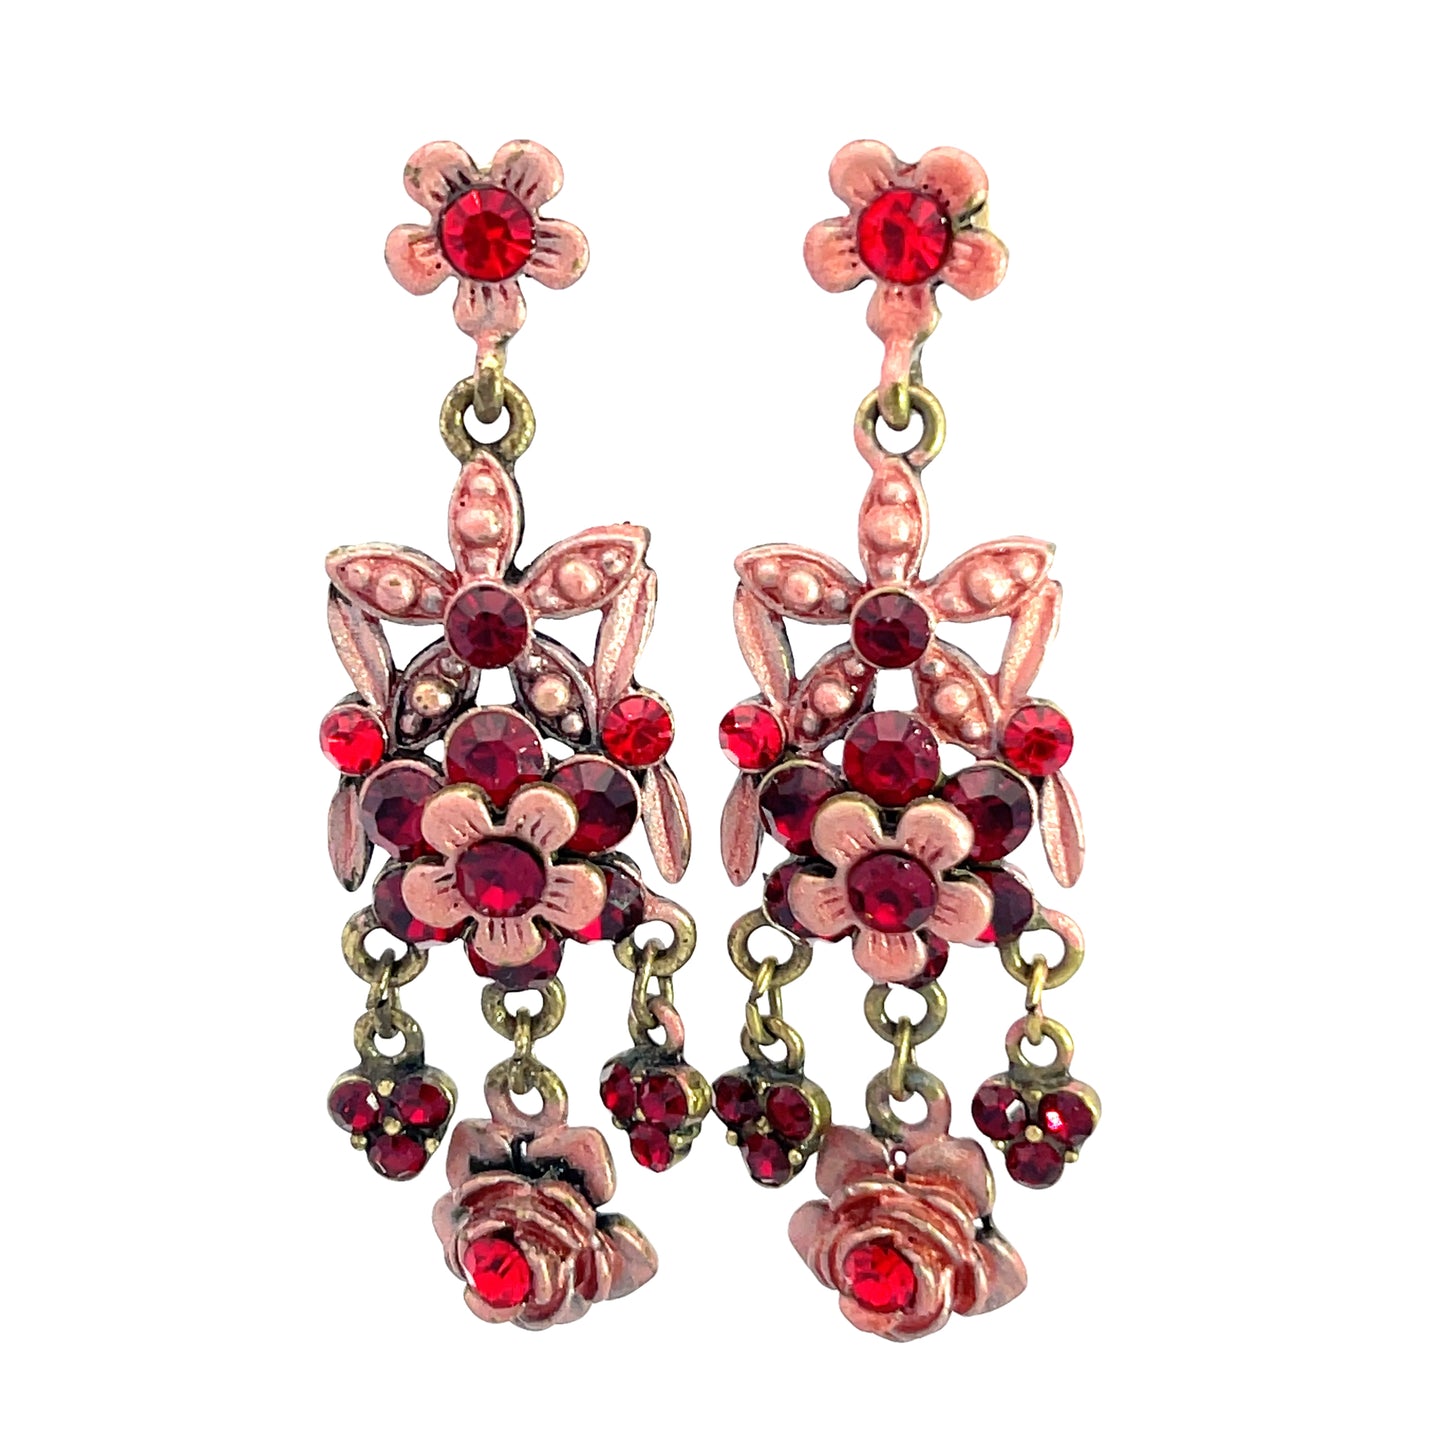 Red & Peach Floral Dangle Earring - Born To Glam